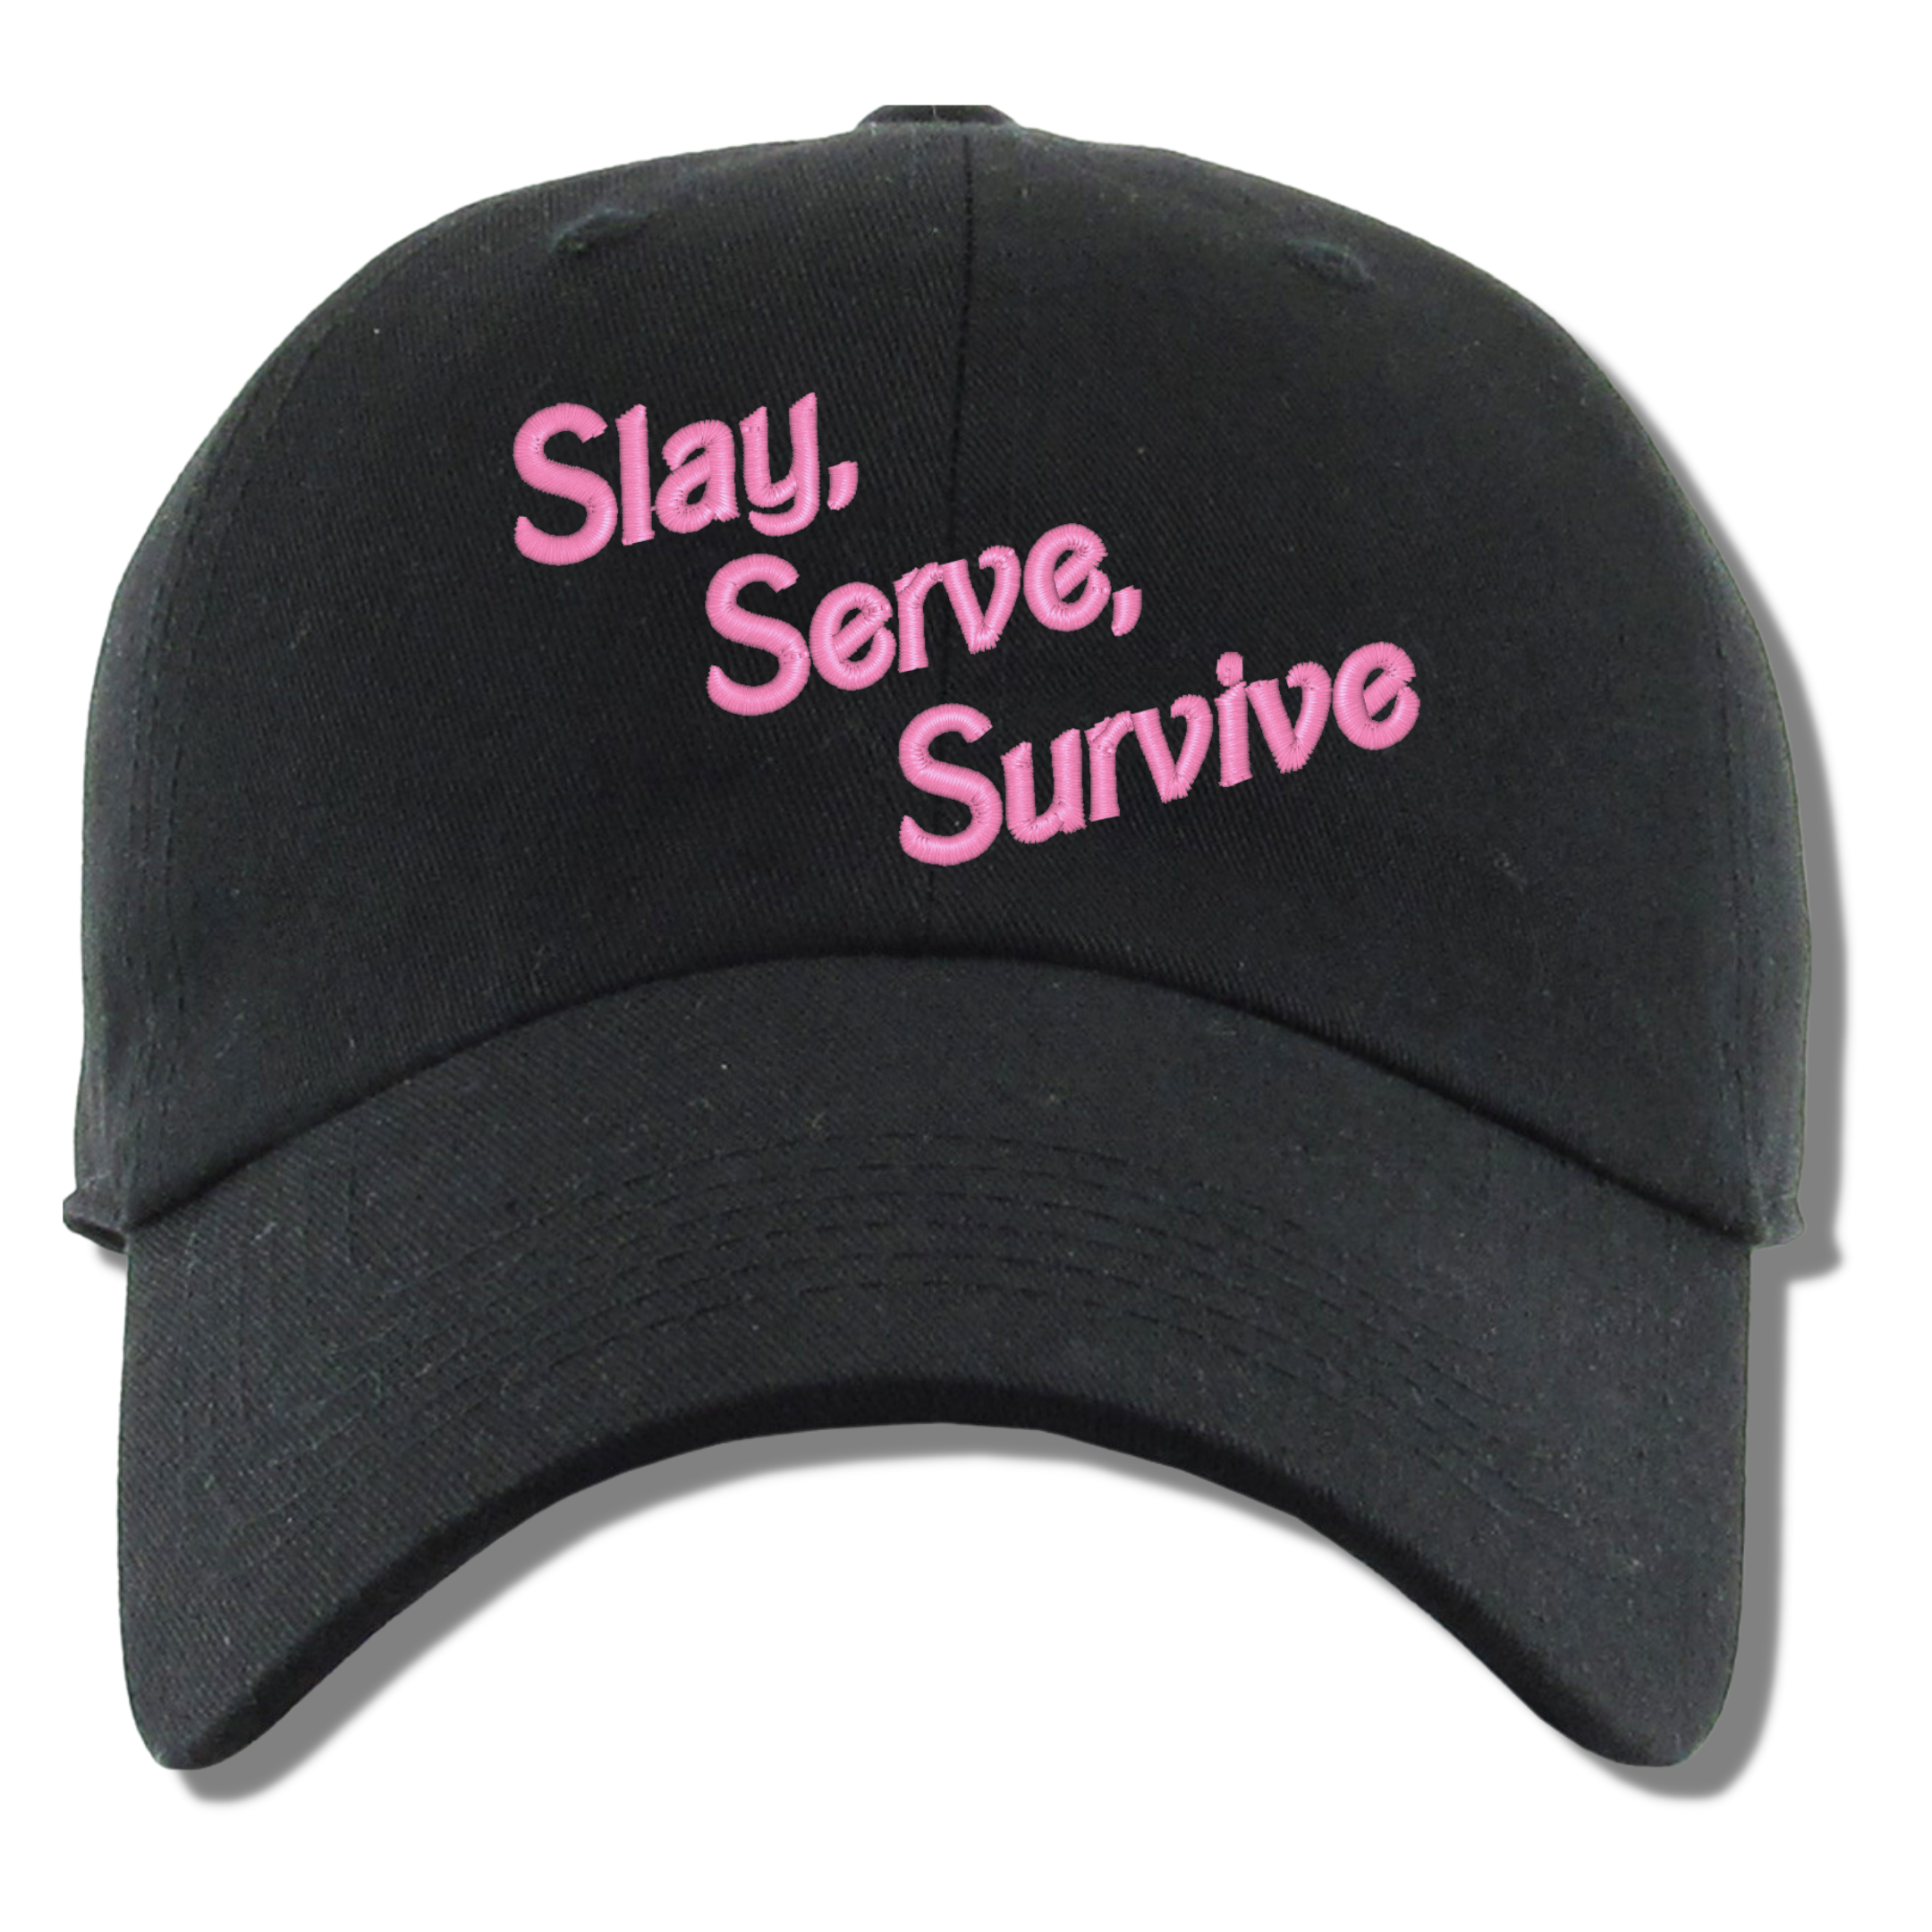 Slay Serve Survive Embroidered Black Dad Hat, One Size Fits All